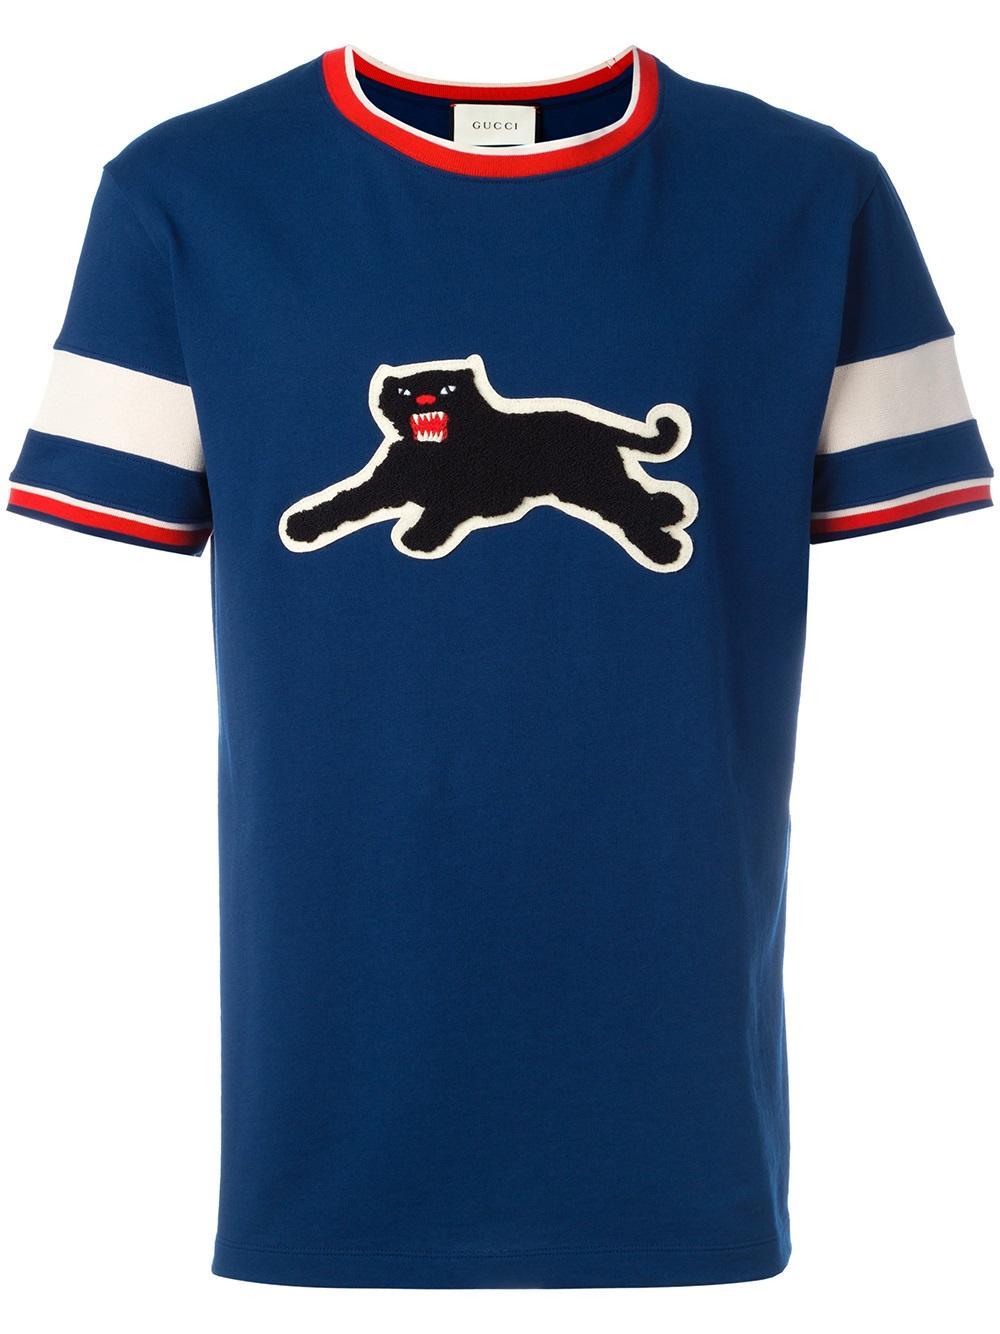 Gucci Cotton Panther T-shirt in Blue for Men - Lyst